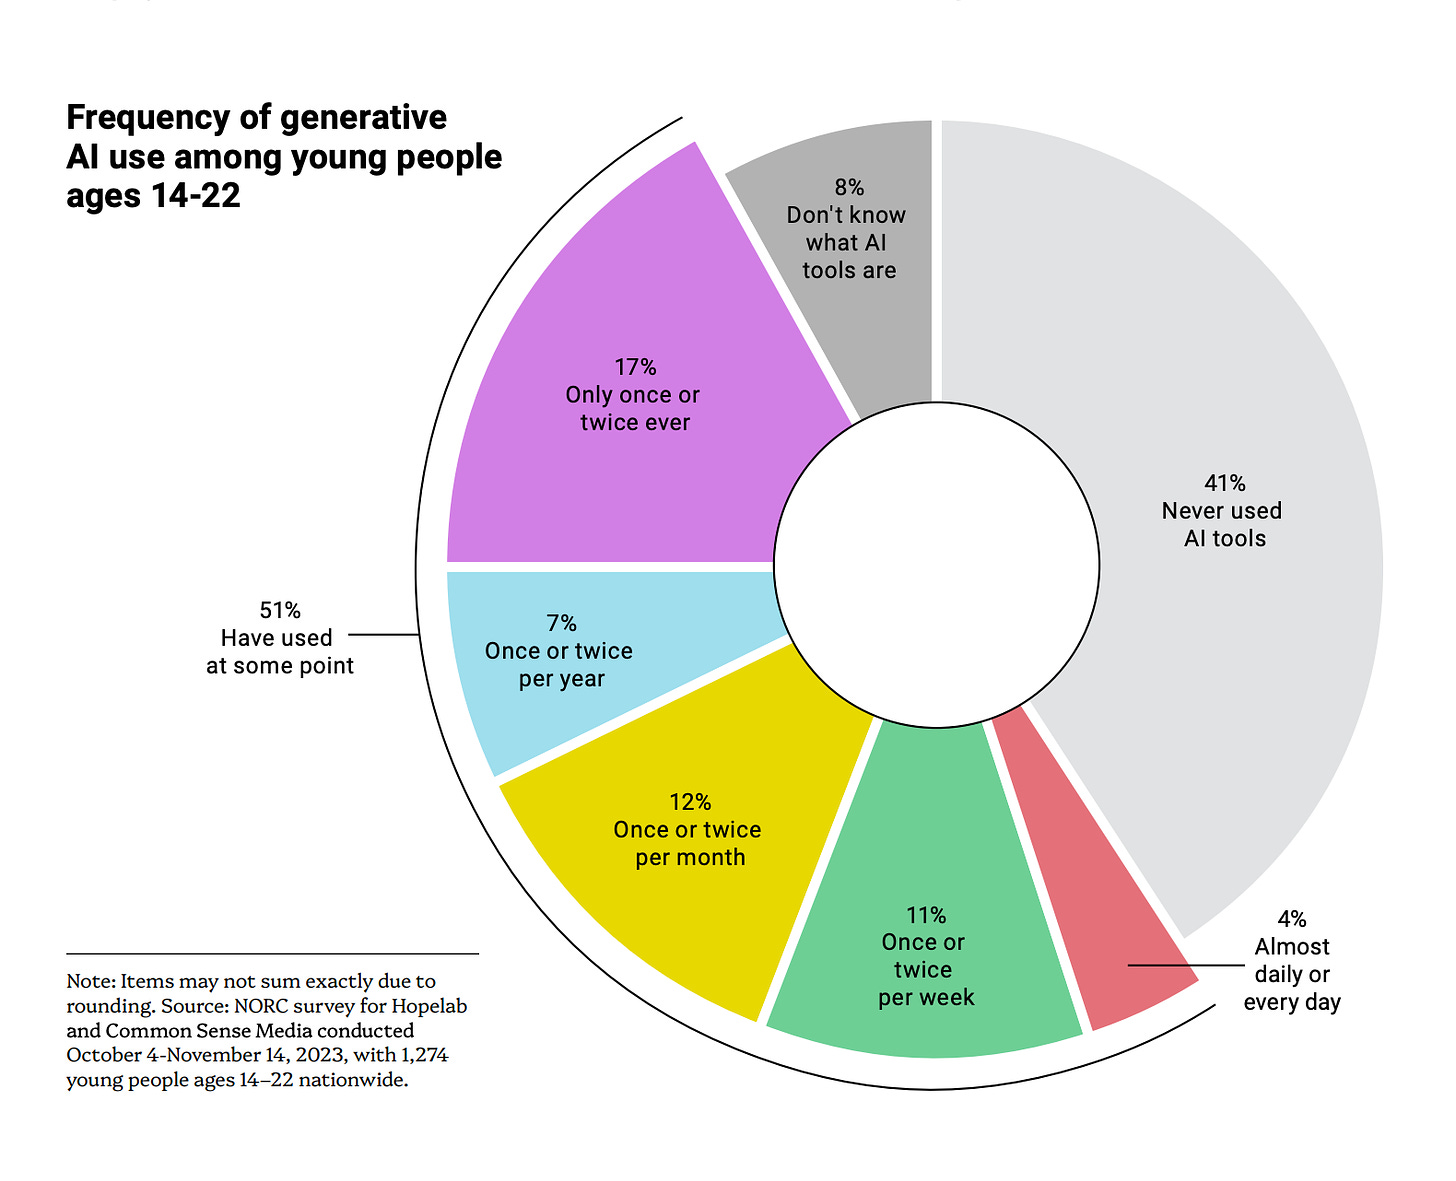 Pie chart showing frequency of AI use among young people aged 14-22